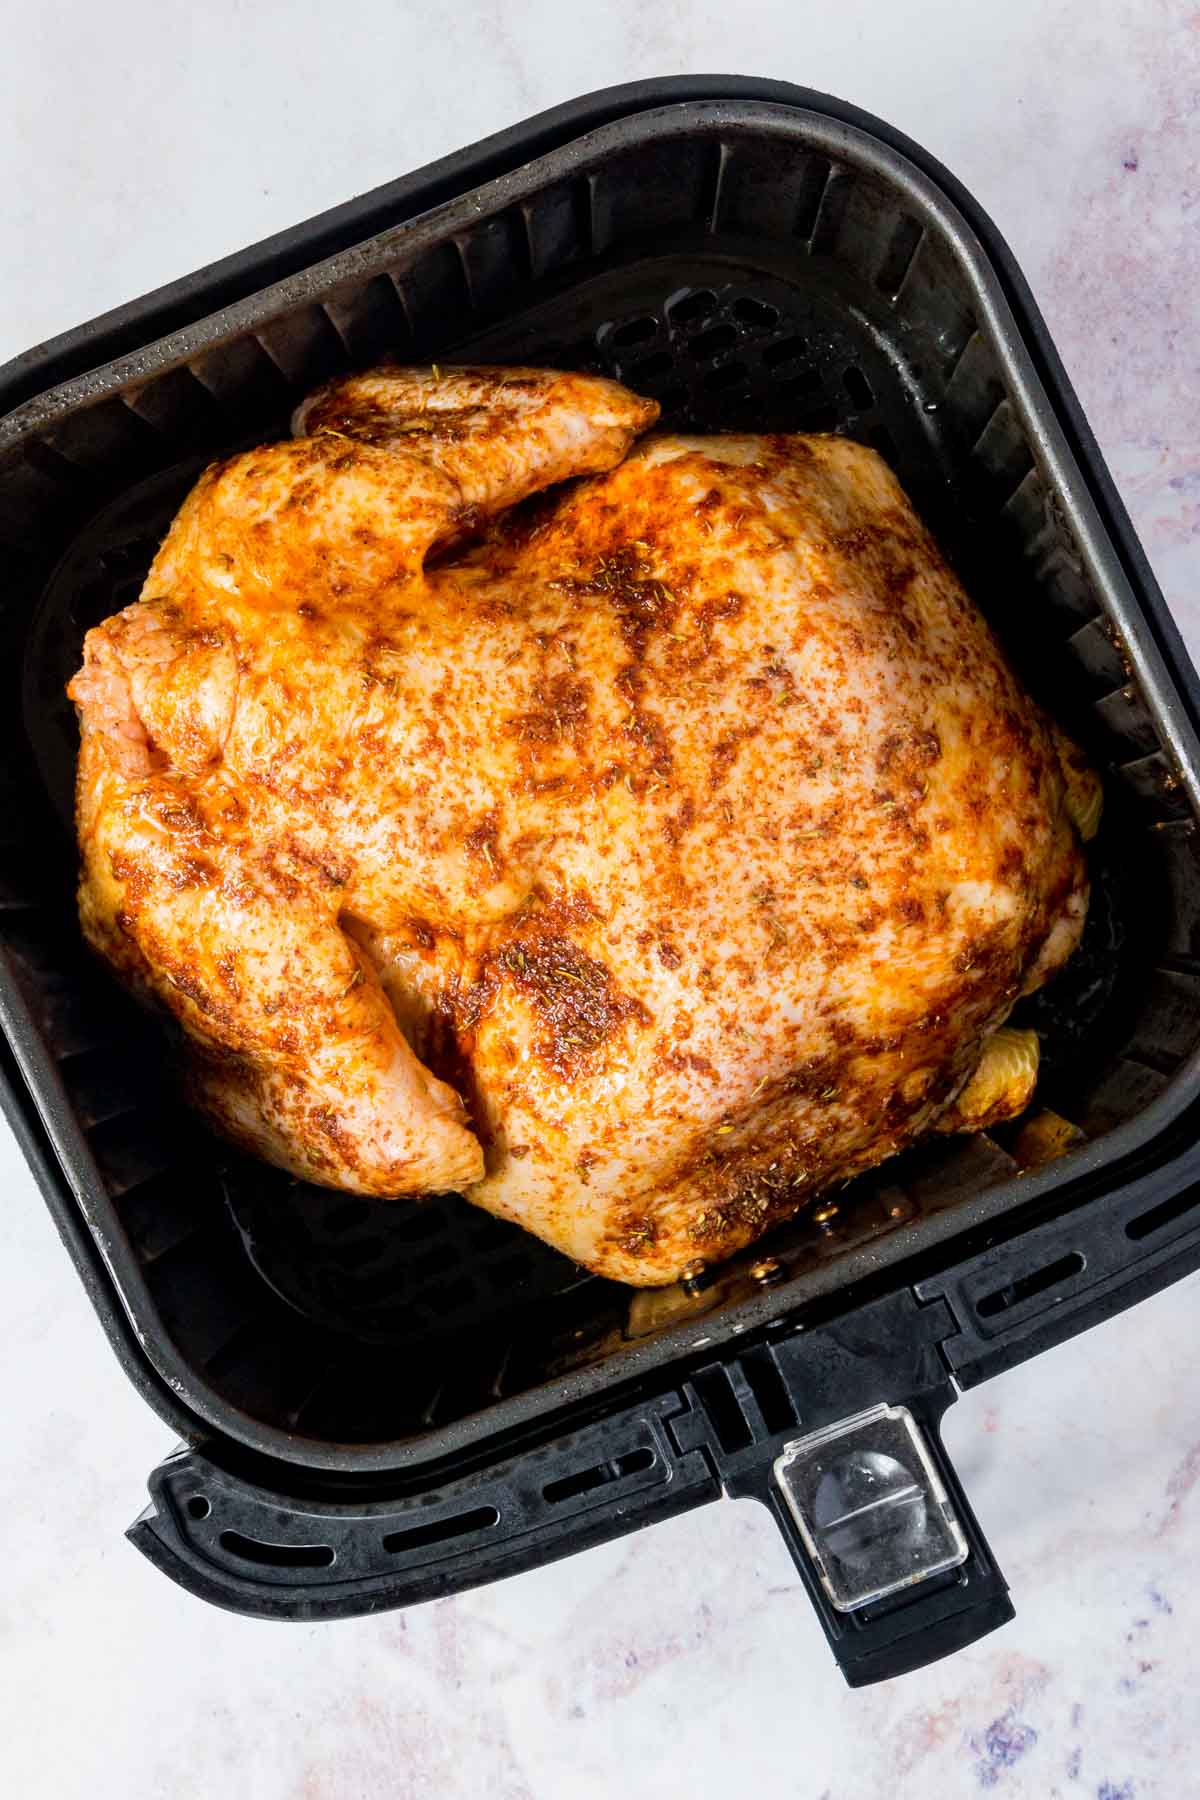 A whole seasoned chicken cooks inside the basket of an air fryer.